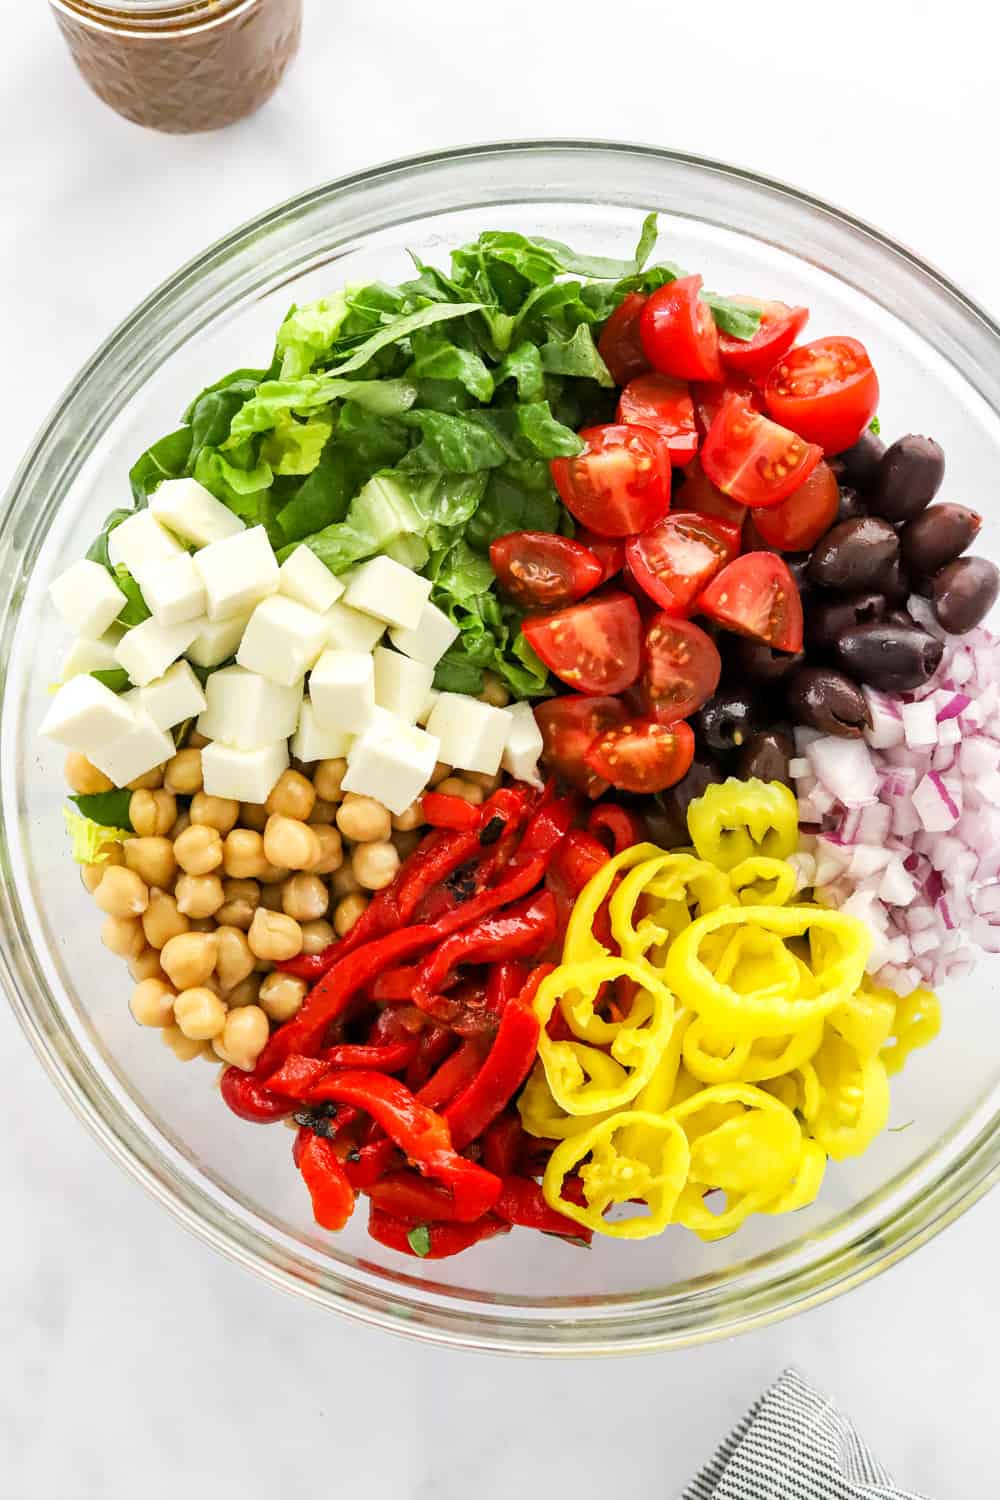 Sliced romaine lettuce, sliced tomatoes, cubed cheese, chickpeas, peppers and onions in a glass salad bowl. 